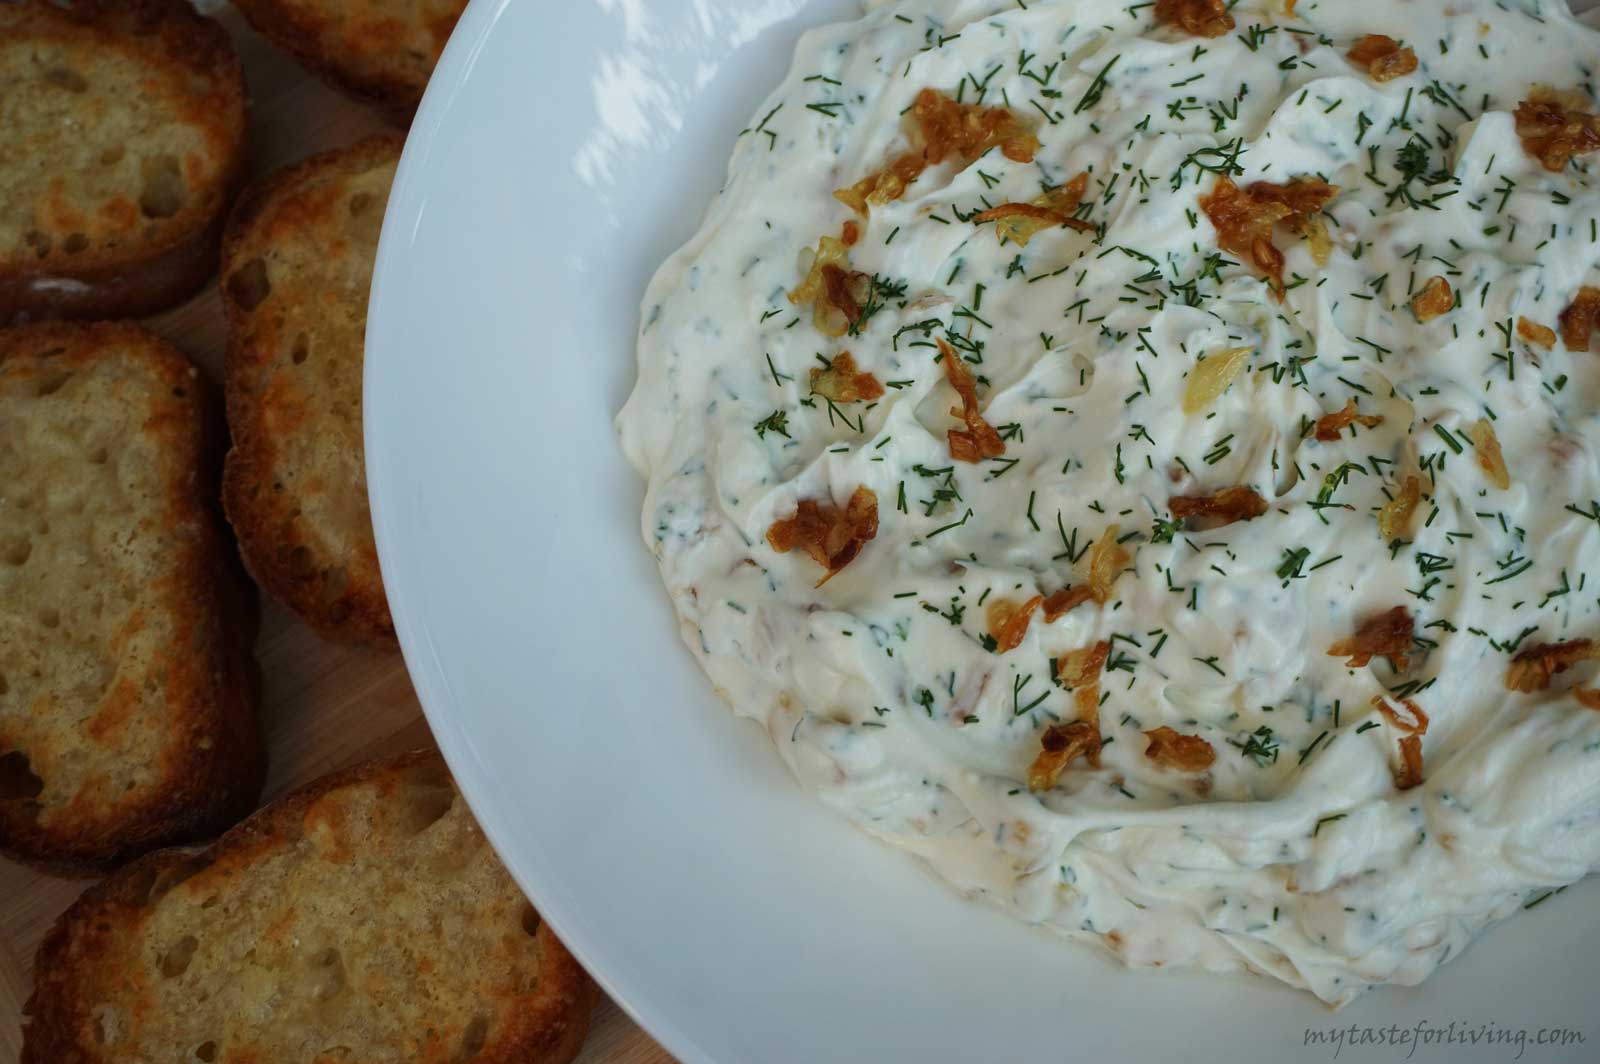 Delicious and appetizing dip of caramelized onions, sour cream, cream cheese, dill and garlic.